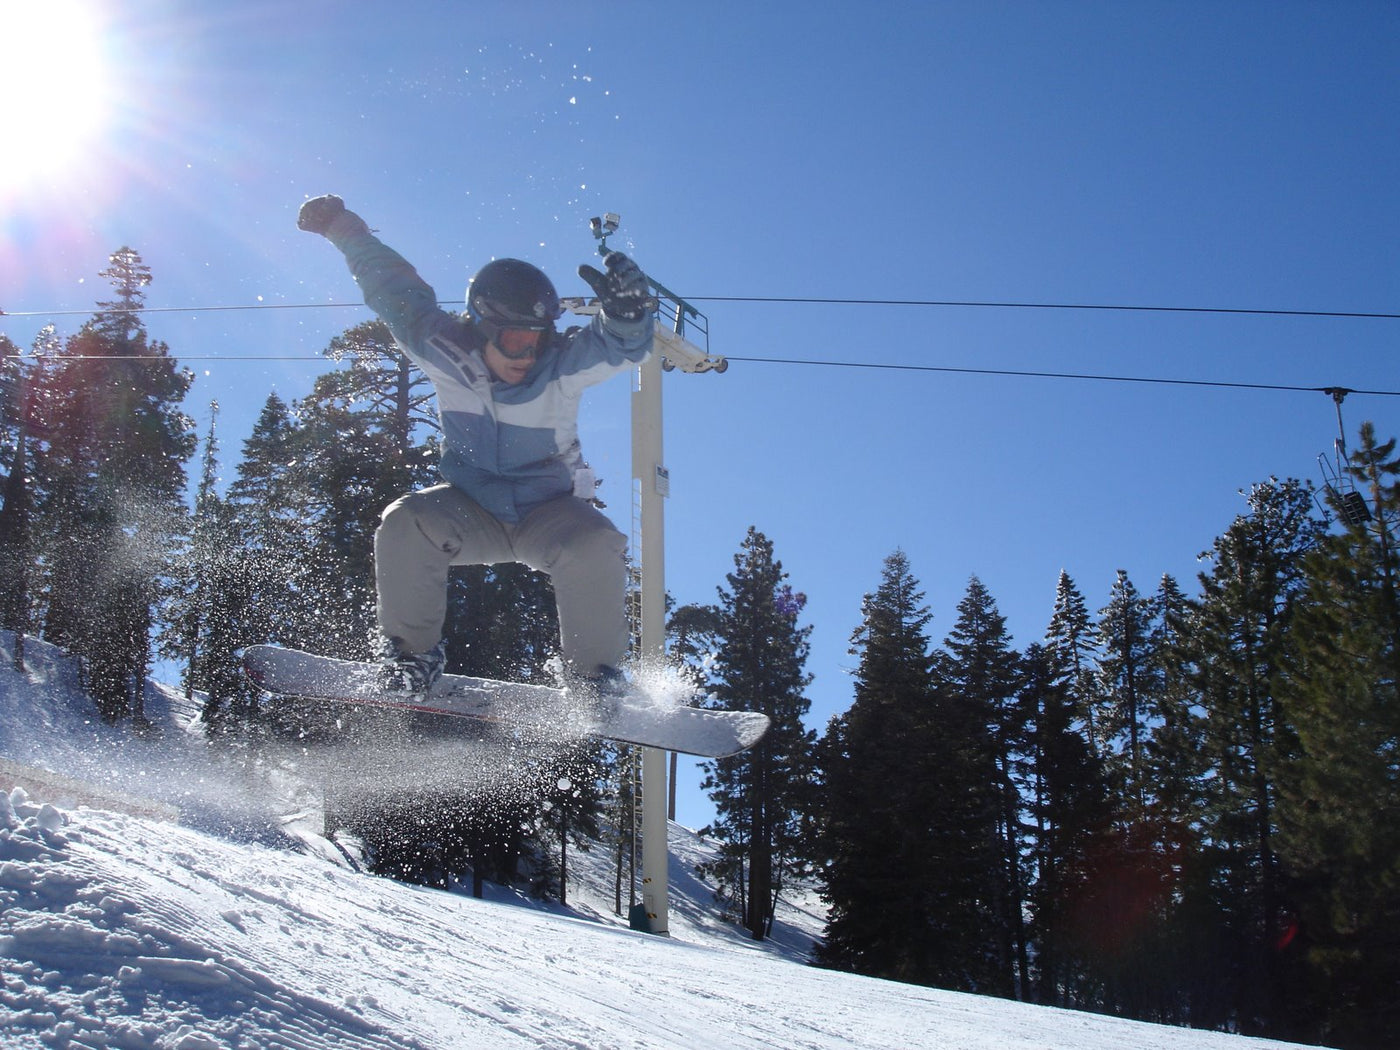 Melissa Allen, co-creator of Active Life Company and Kovr Sunscreen, catching some air while snowboarding.